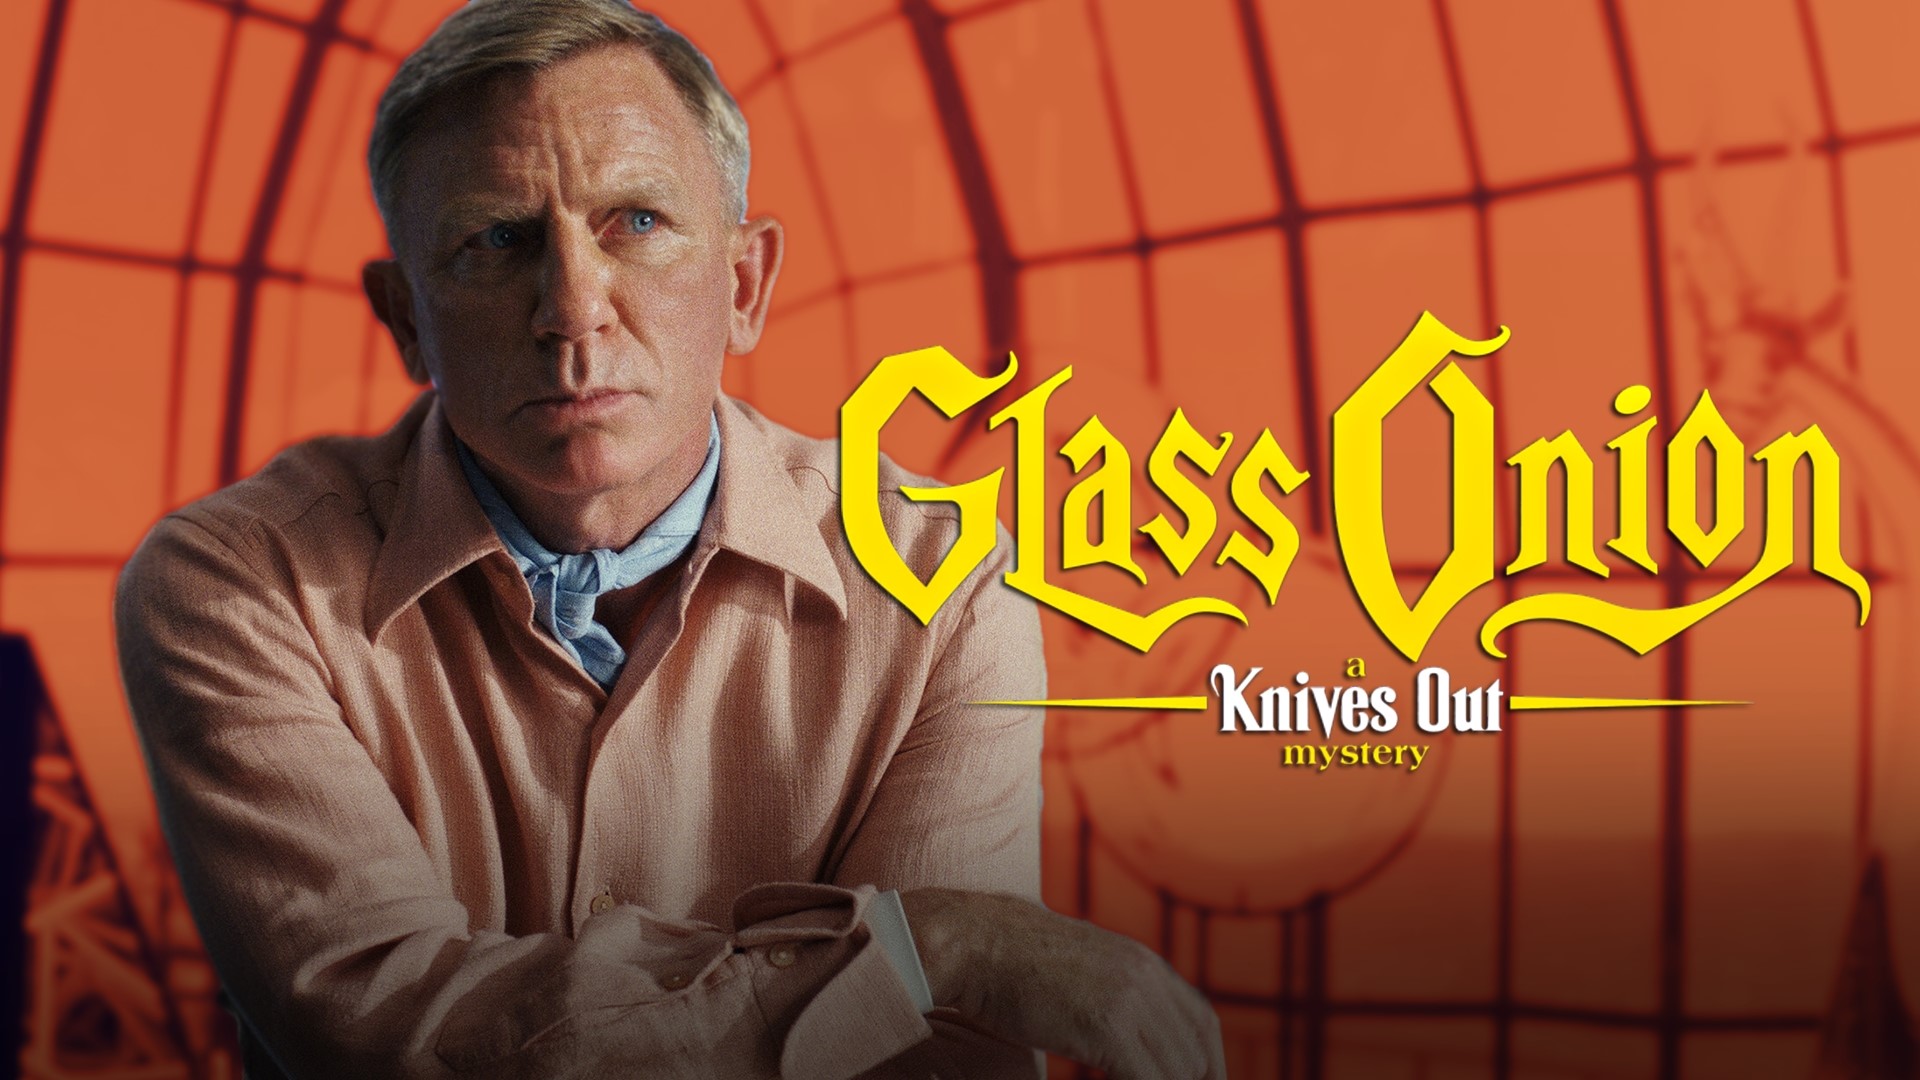 Rian Johnson returns to the Knives Out universe to give Benoit Blanc a fun, silly, and often stupid (in the best of ways) mystery.